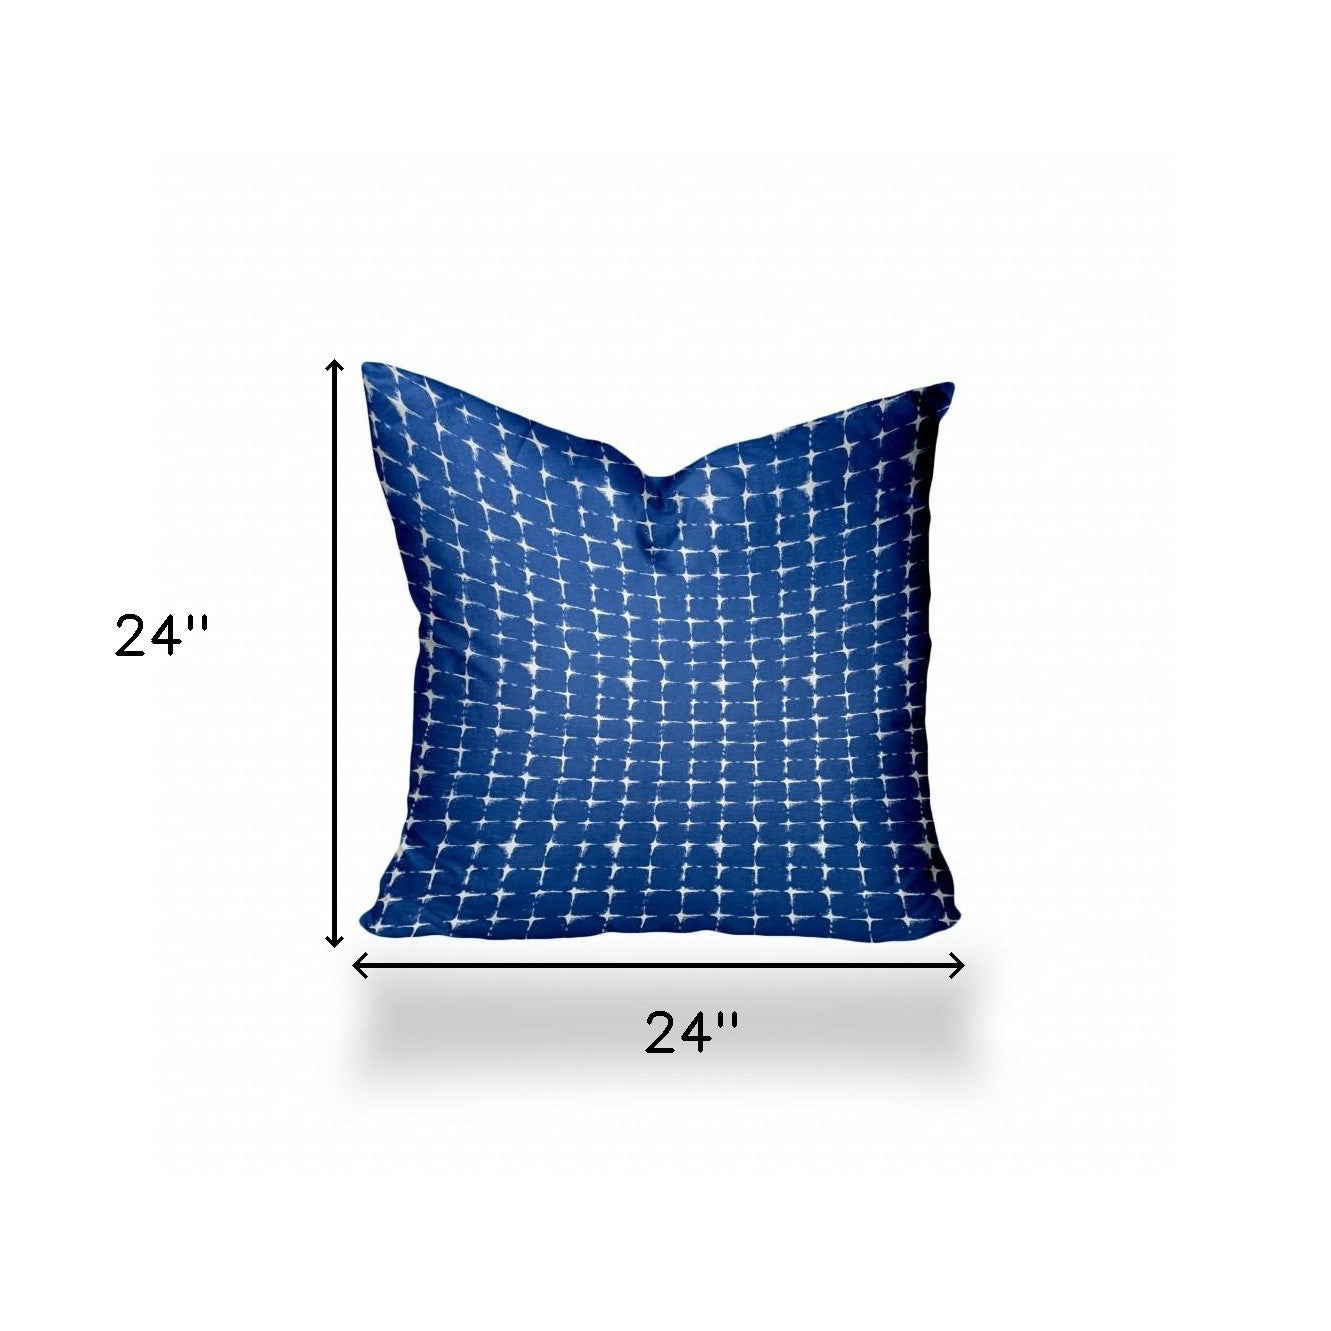 24" X 24" Blue And White Enveloped Gingham Throw Indoor Outdoor Pillow